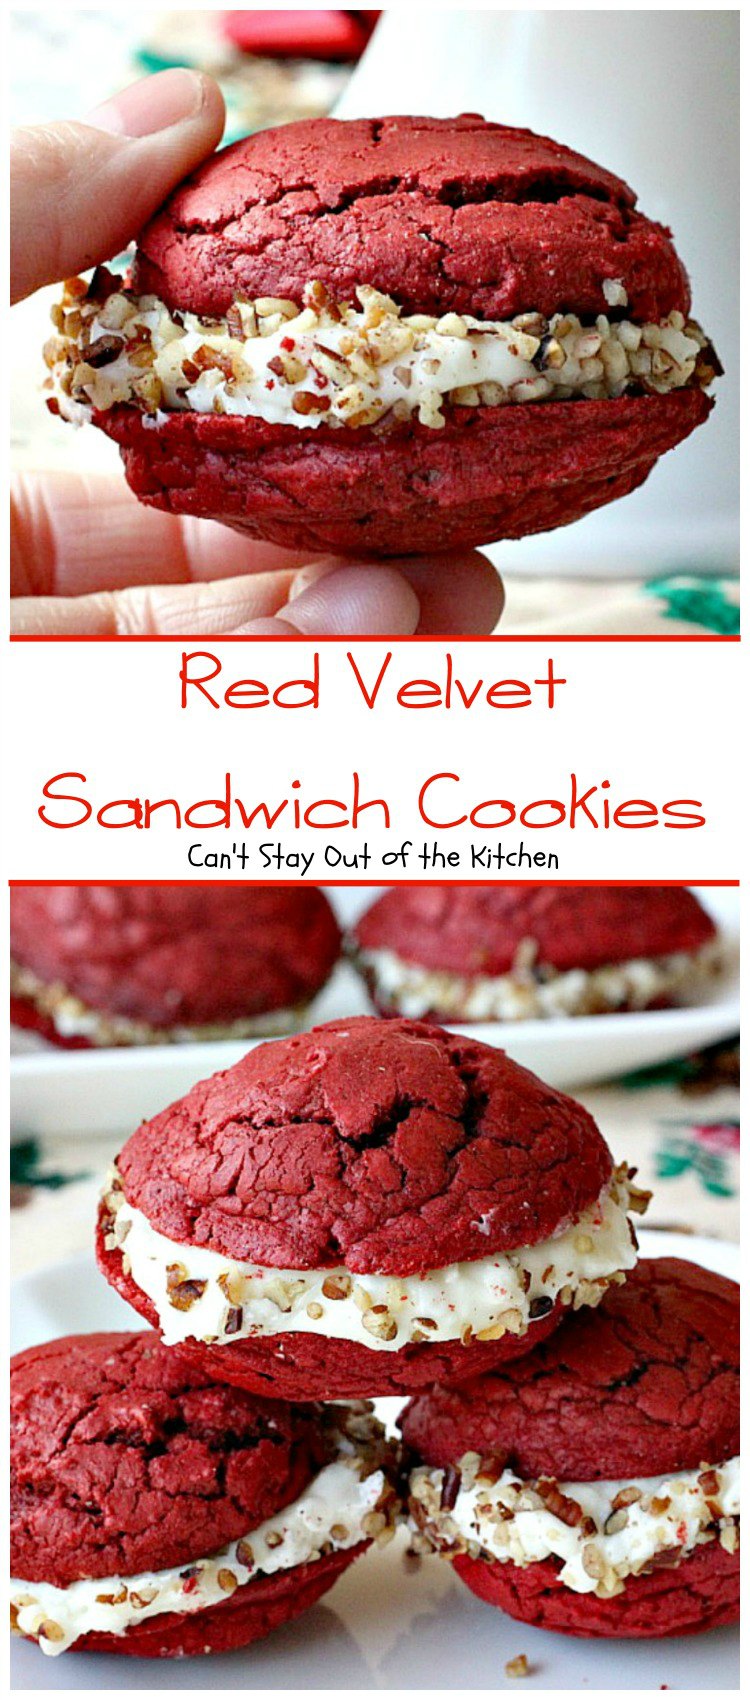 Red Velvet Sandwich Cookies | Can't Stay Out of the Kitchen